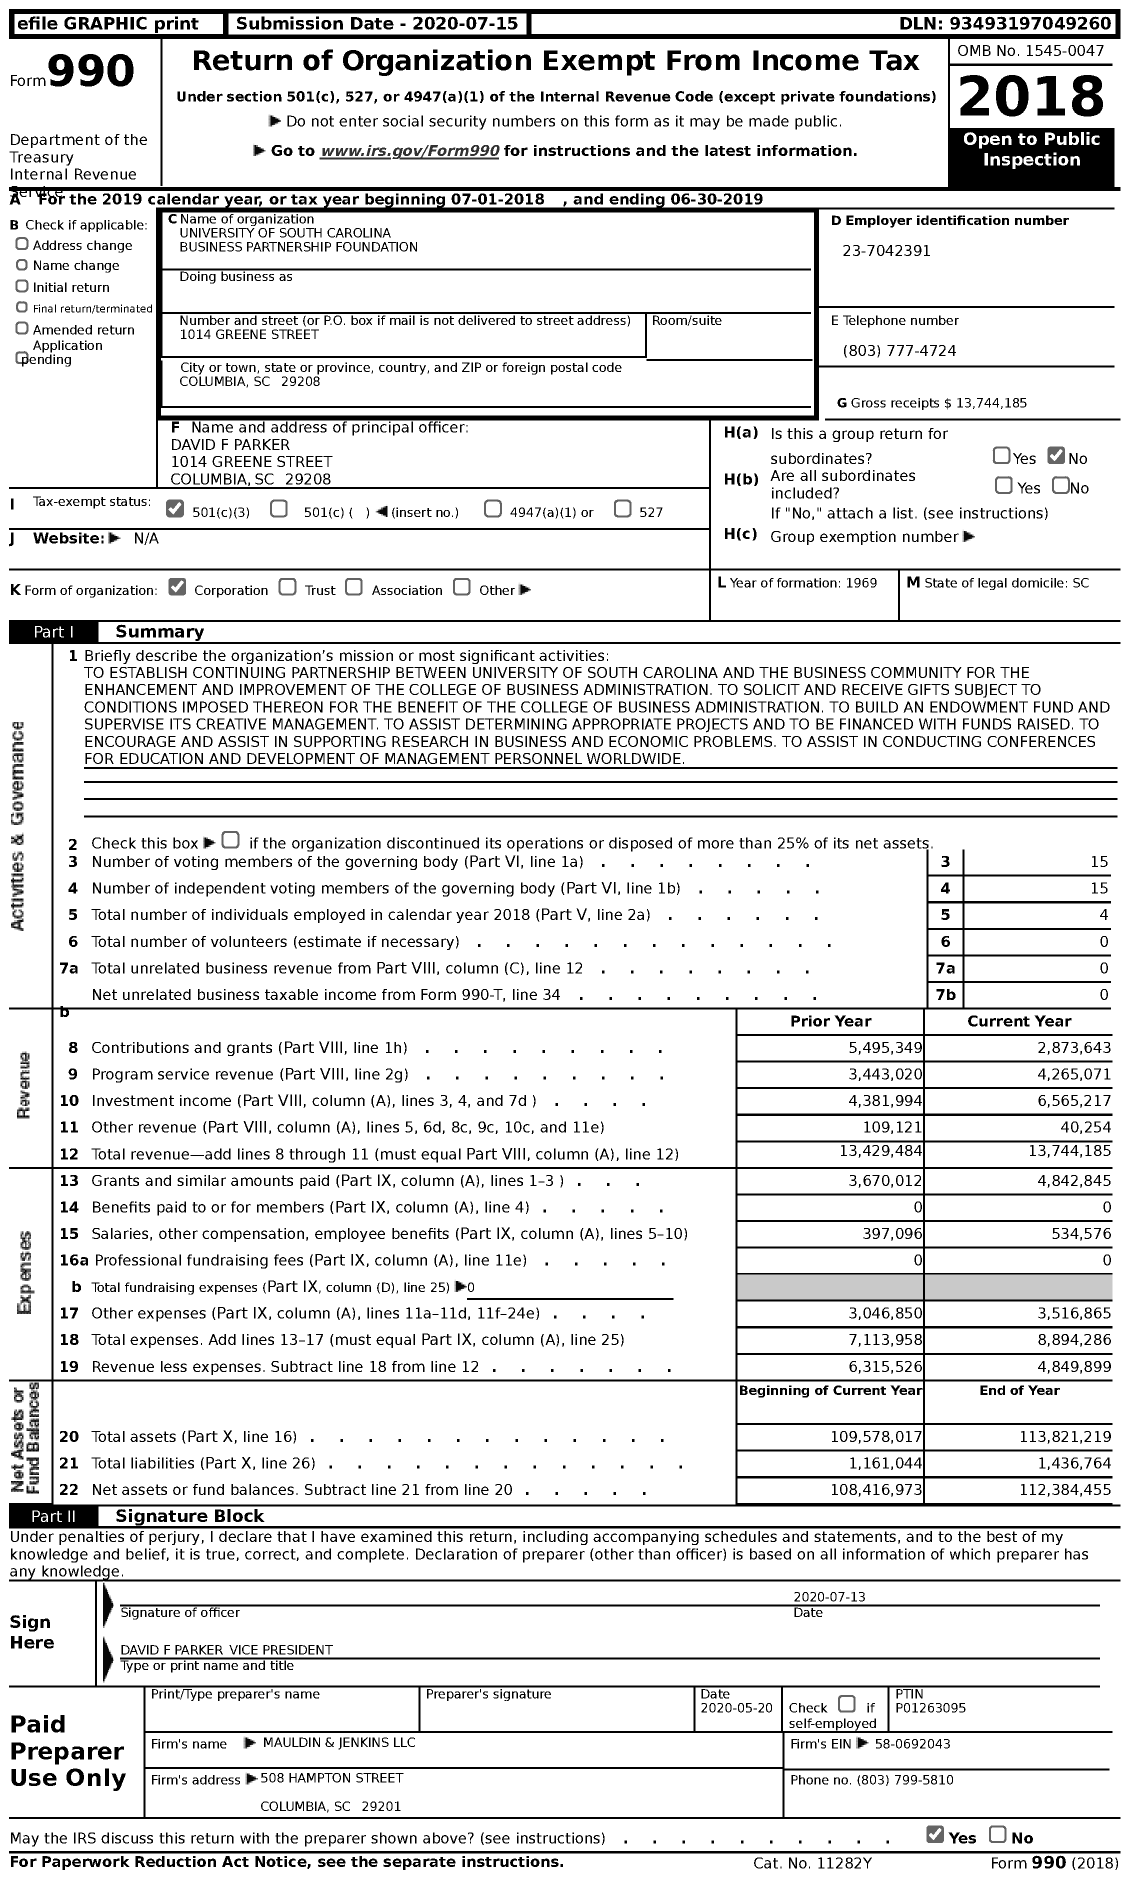 Image of first page of 2018 Form 990 for University of South Carolina Business Partnership Foundation